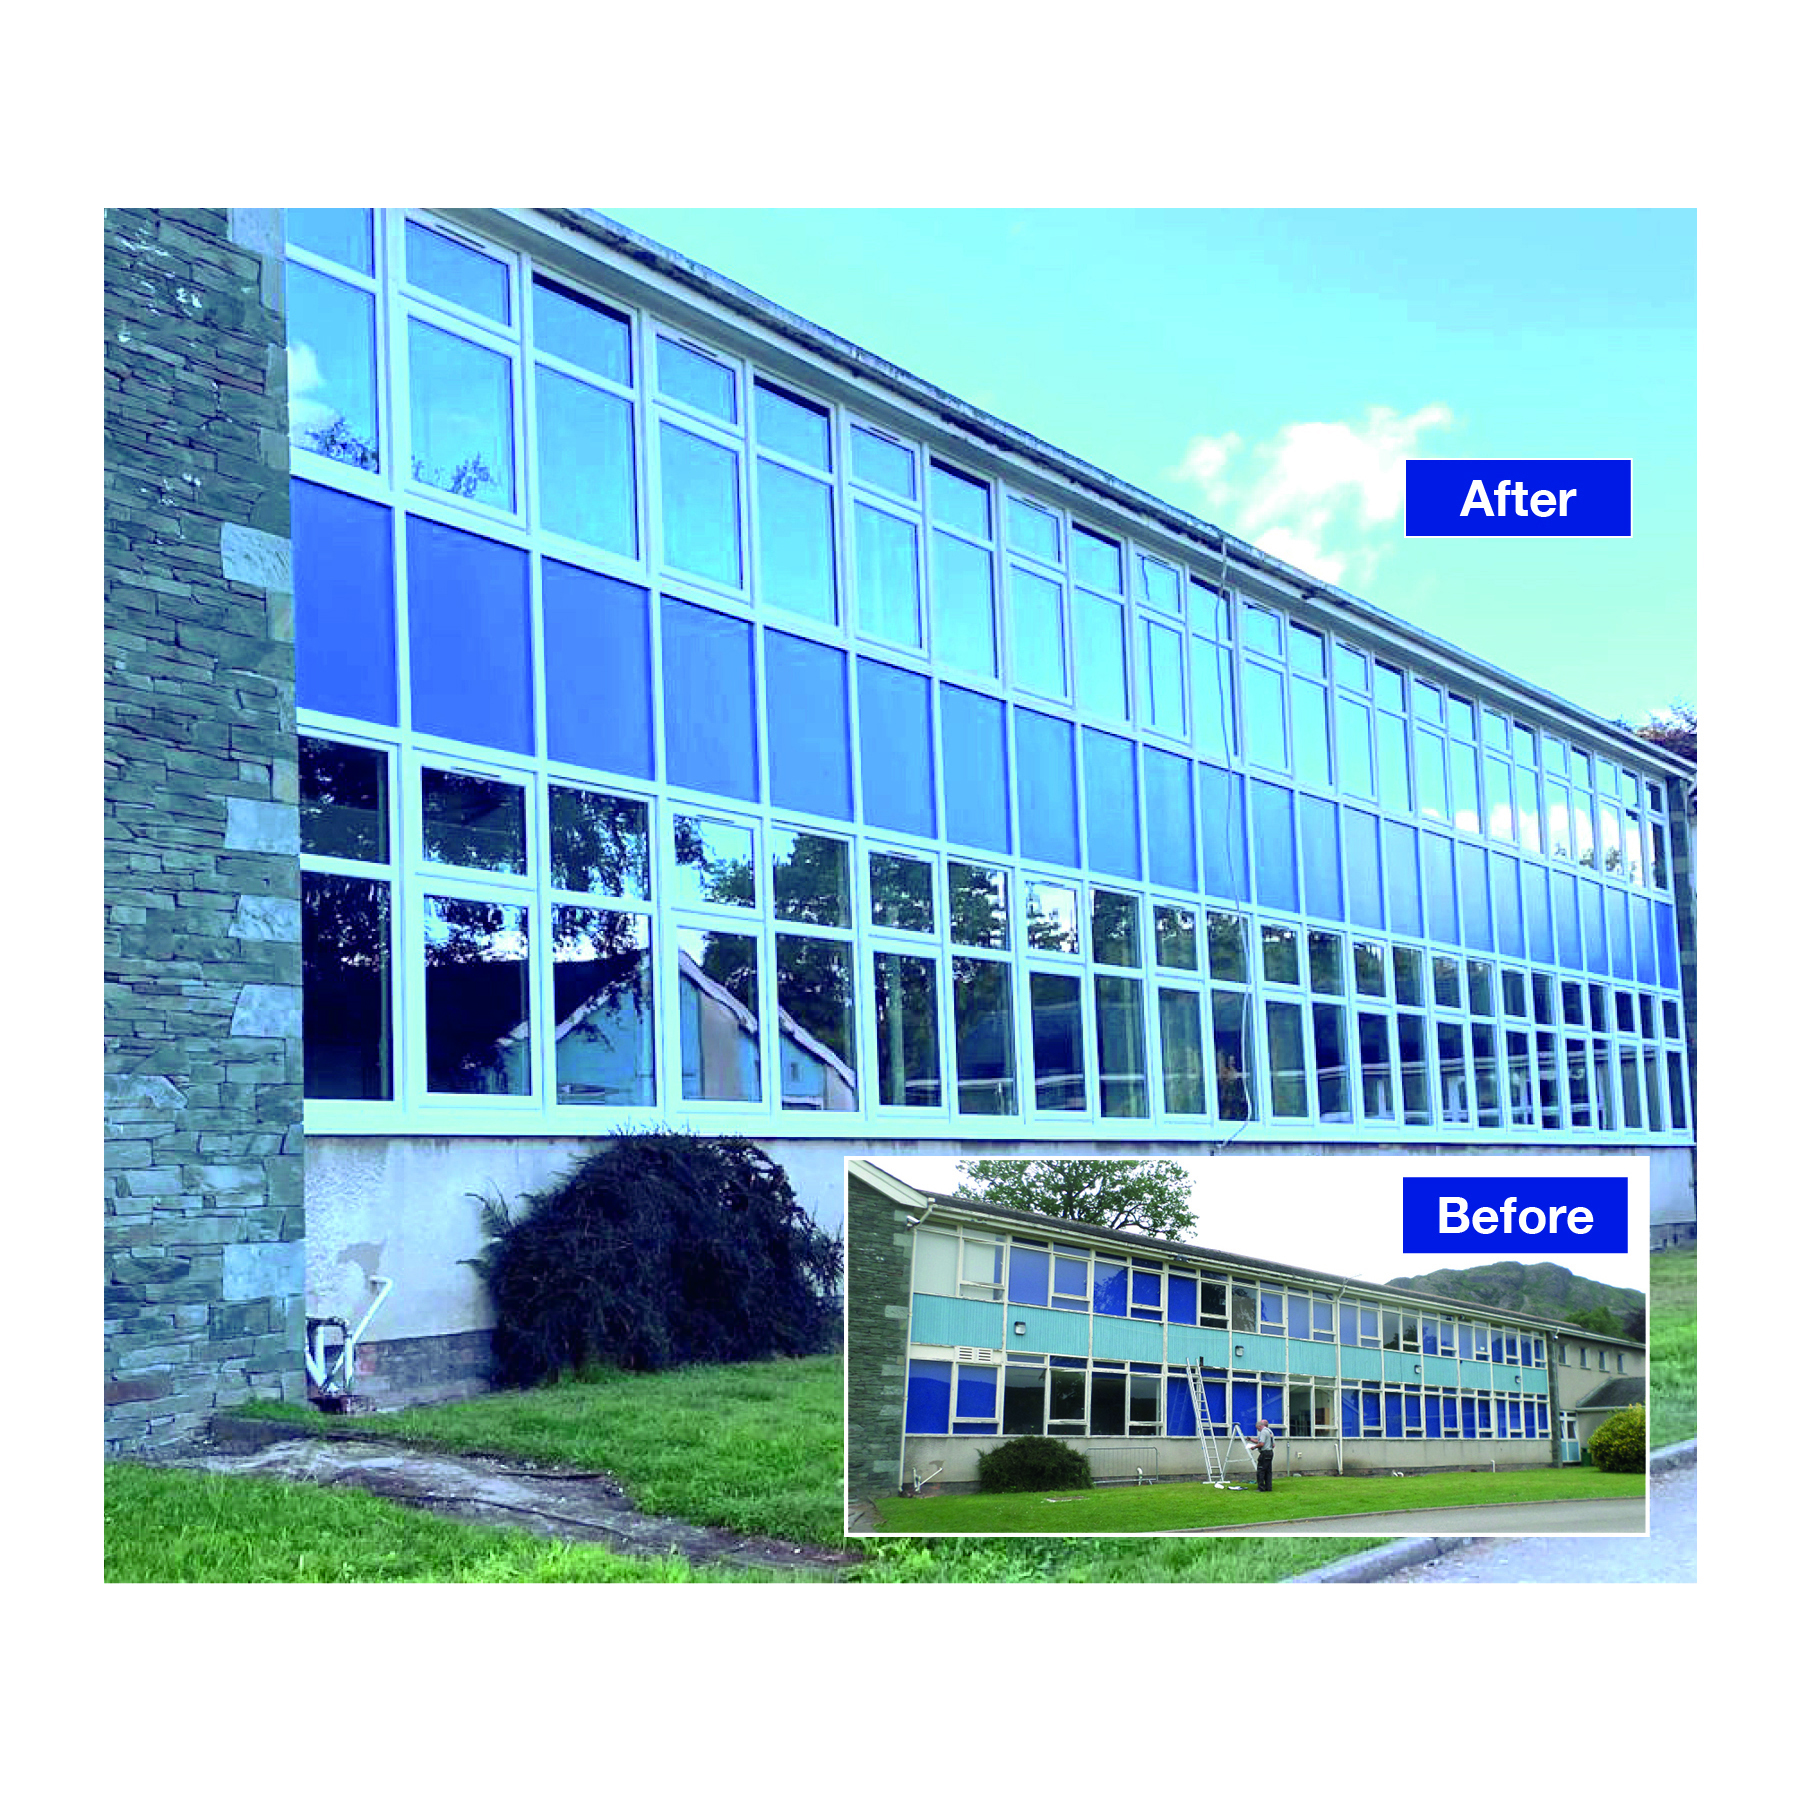 Epwin Window Systems specified for refurbishment programme at Cumbria secondary school